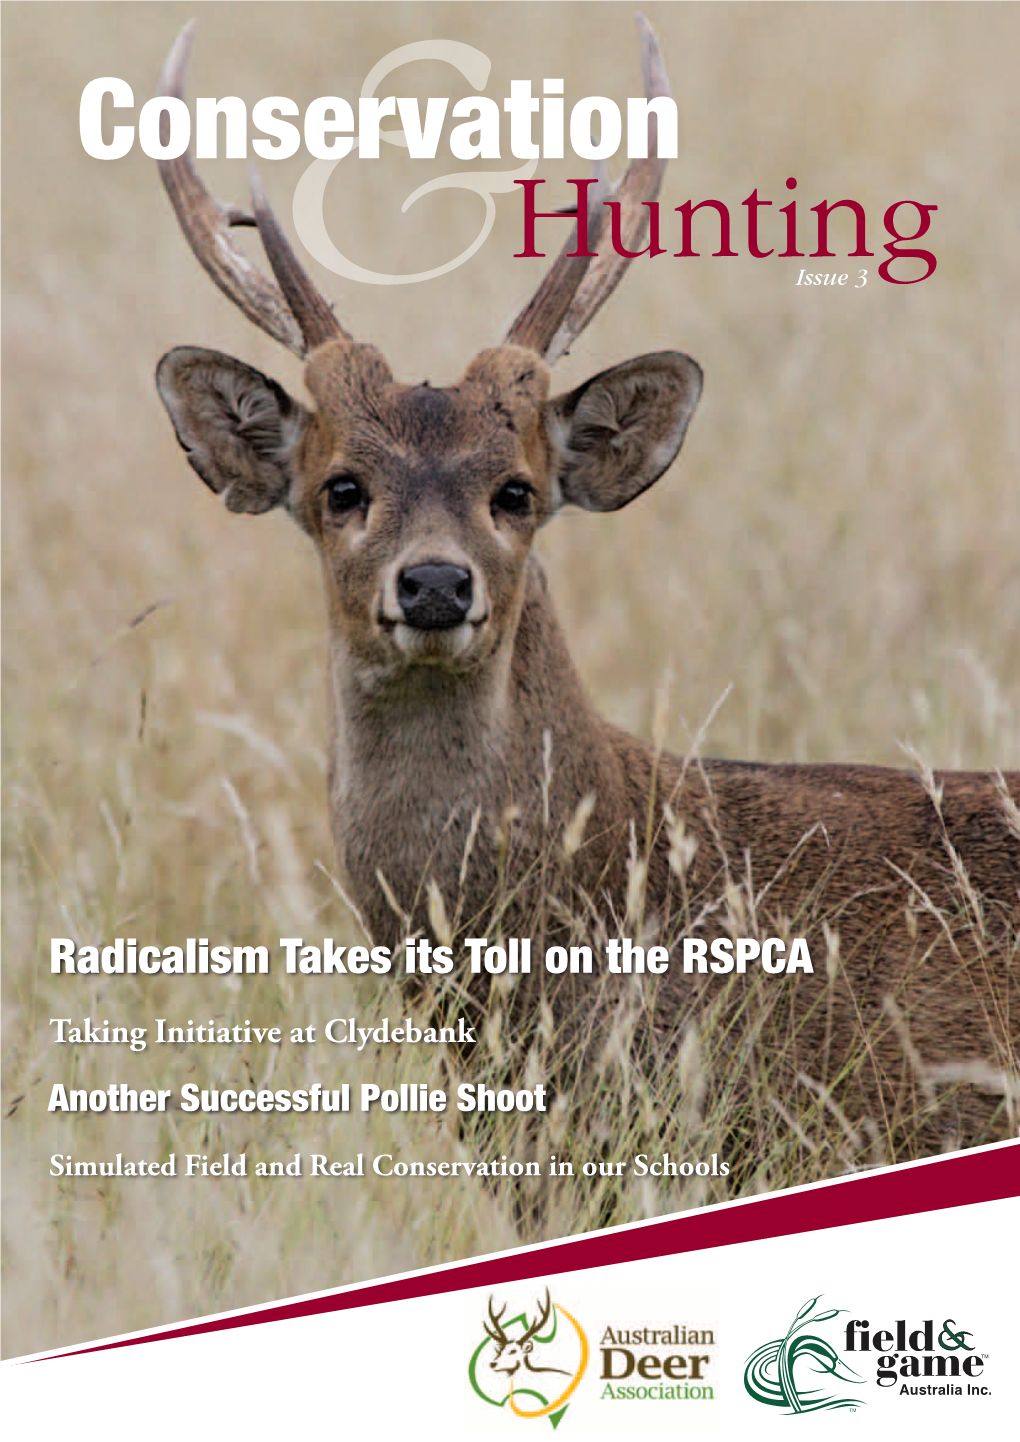 Conservation Hunting & Issue 3